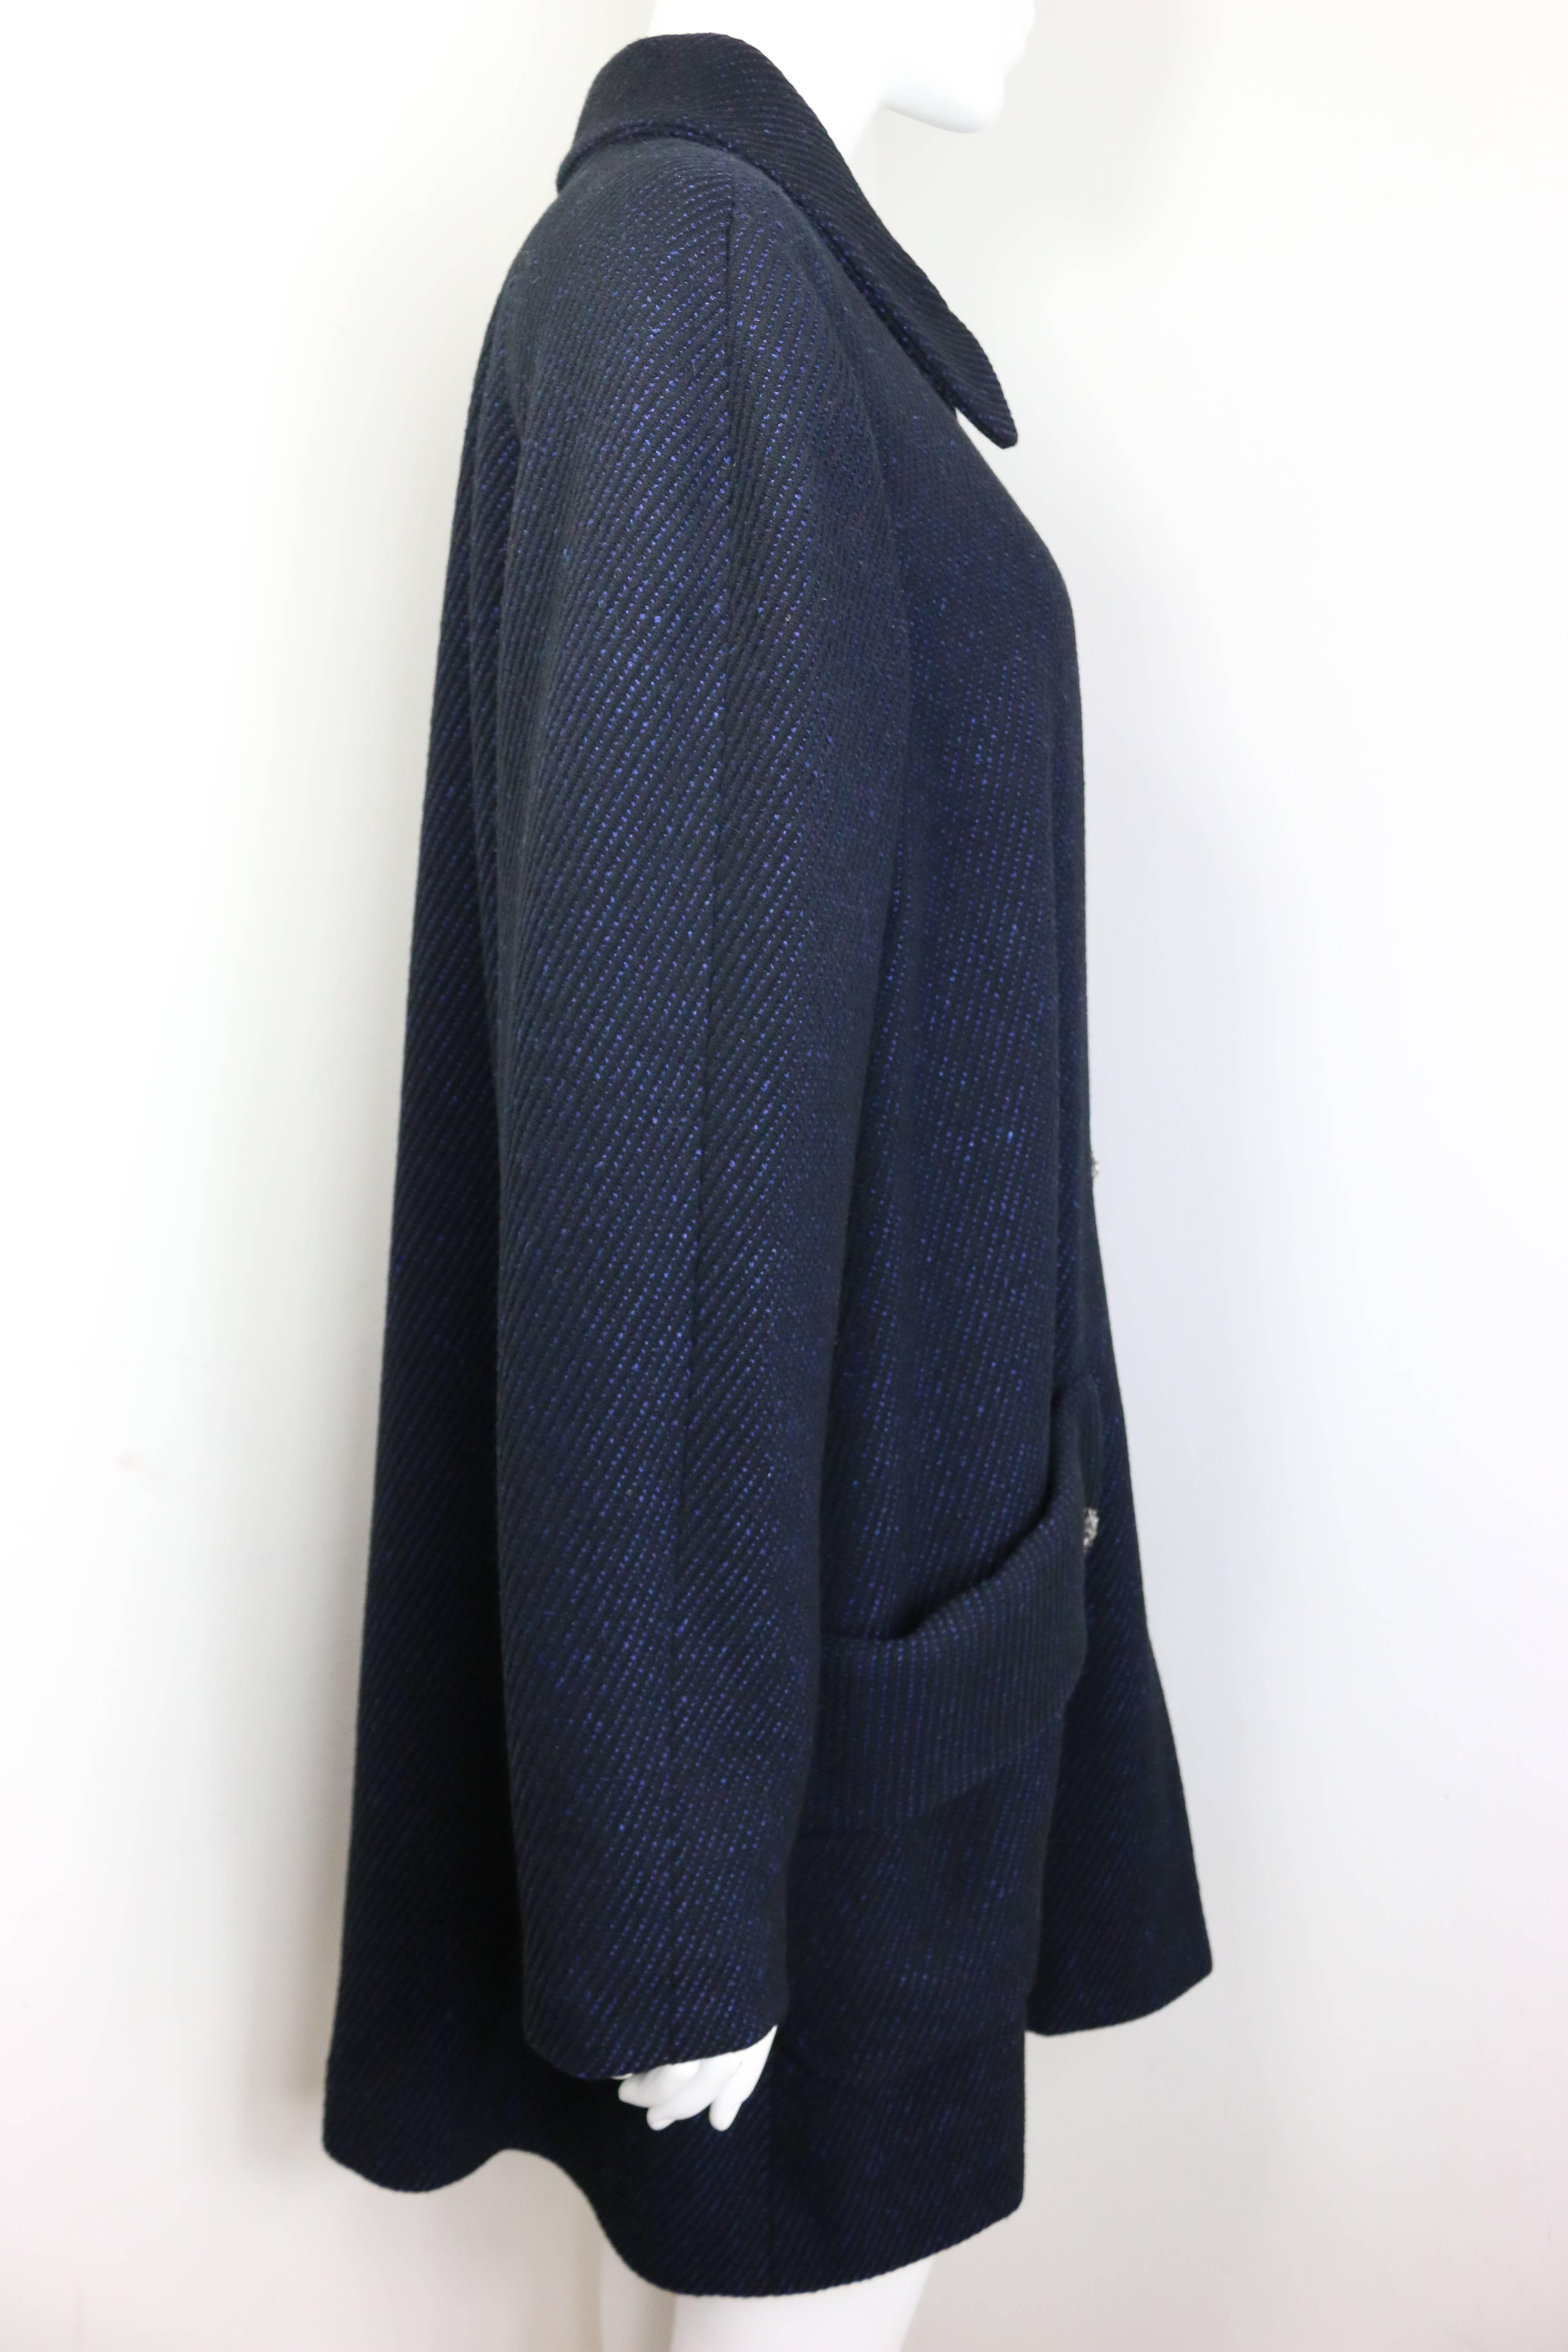 Chanel Black and Blue Tweed Wool Coat  In Excellent Condition For Sale In Sheung Wan, HK